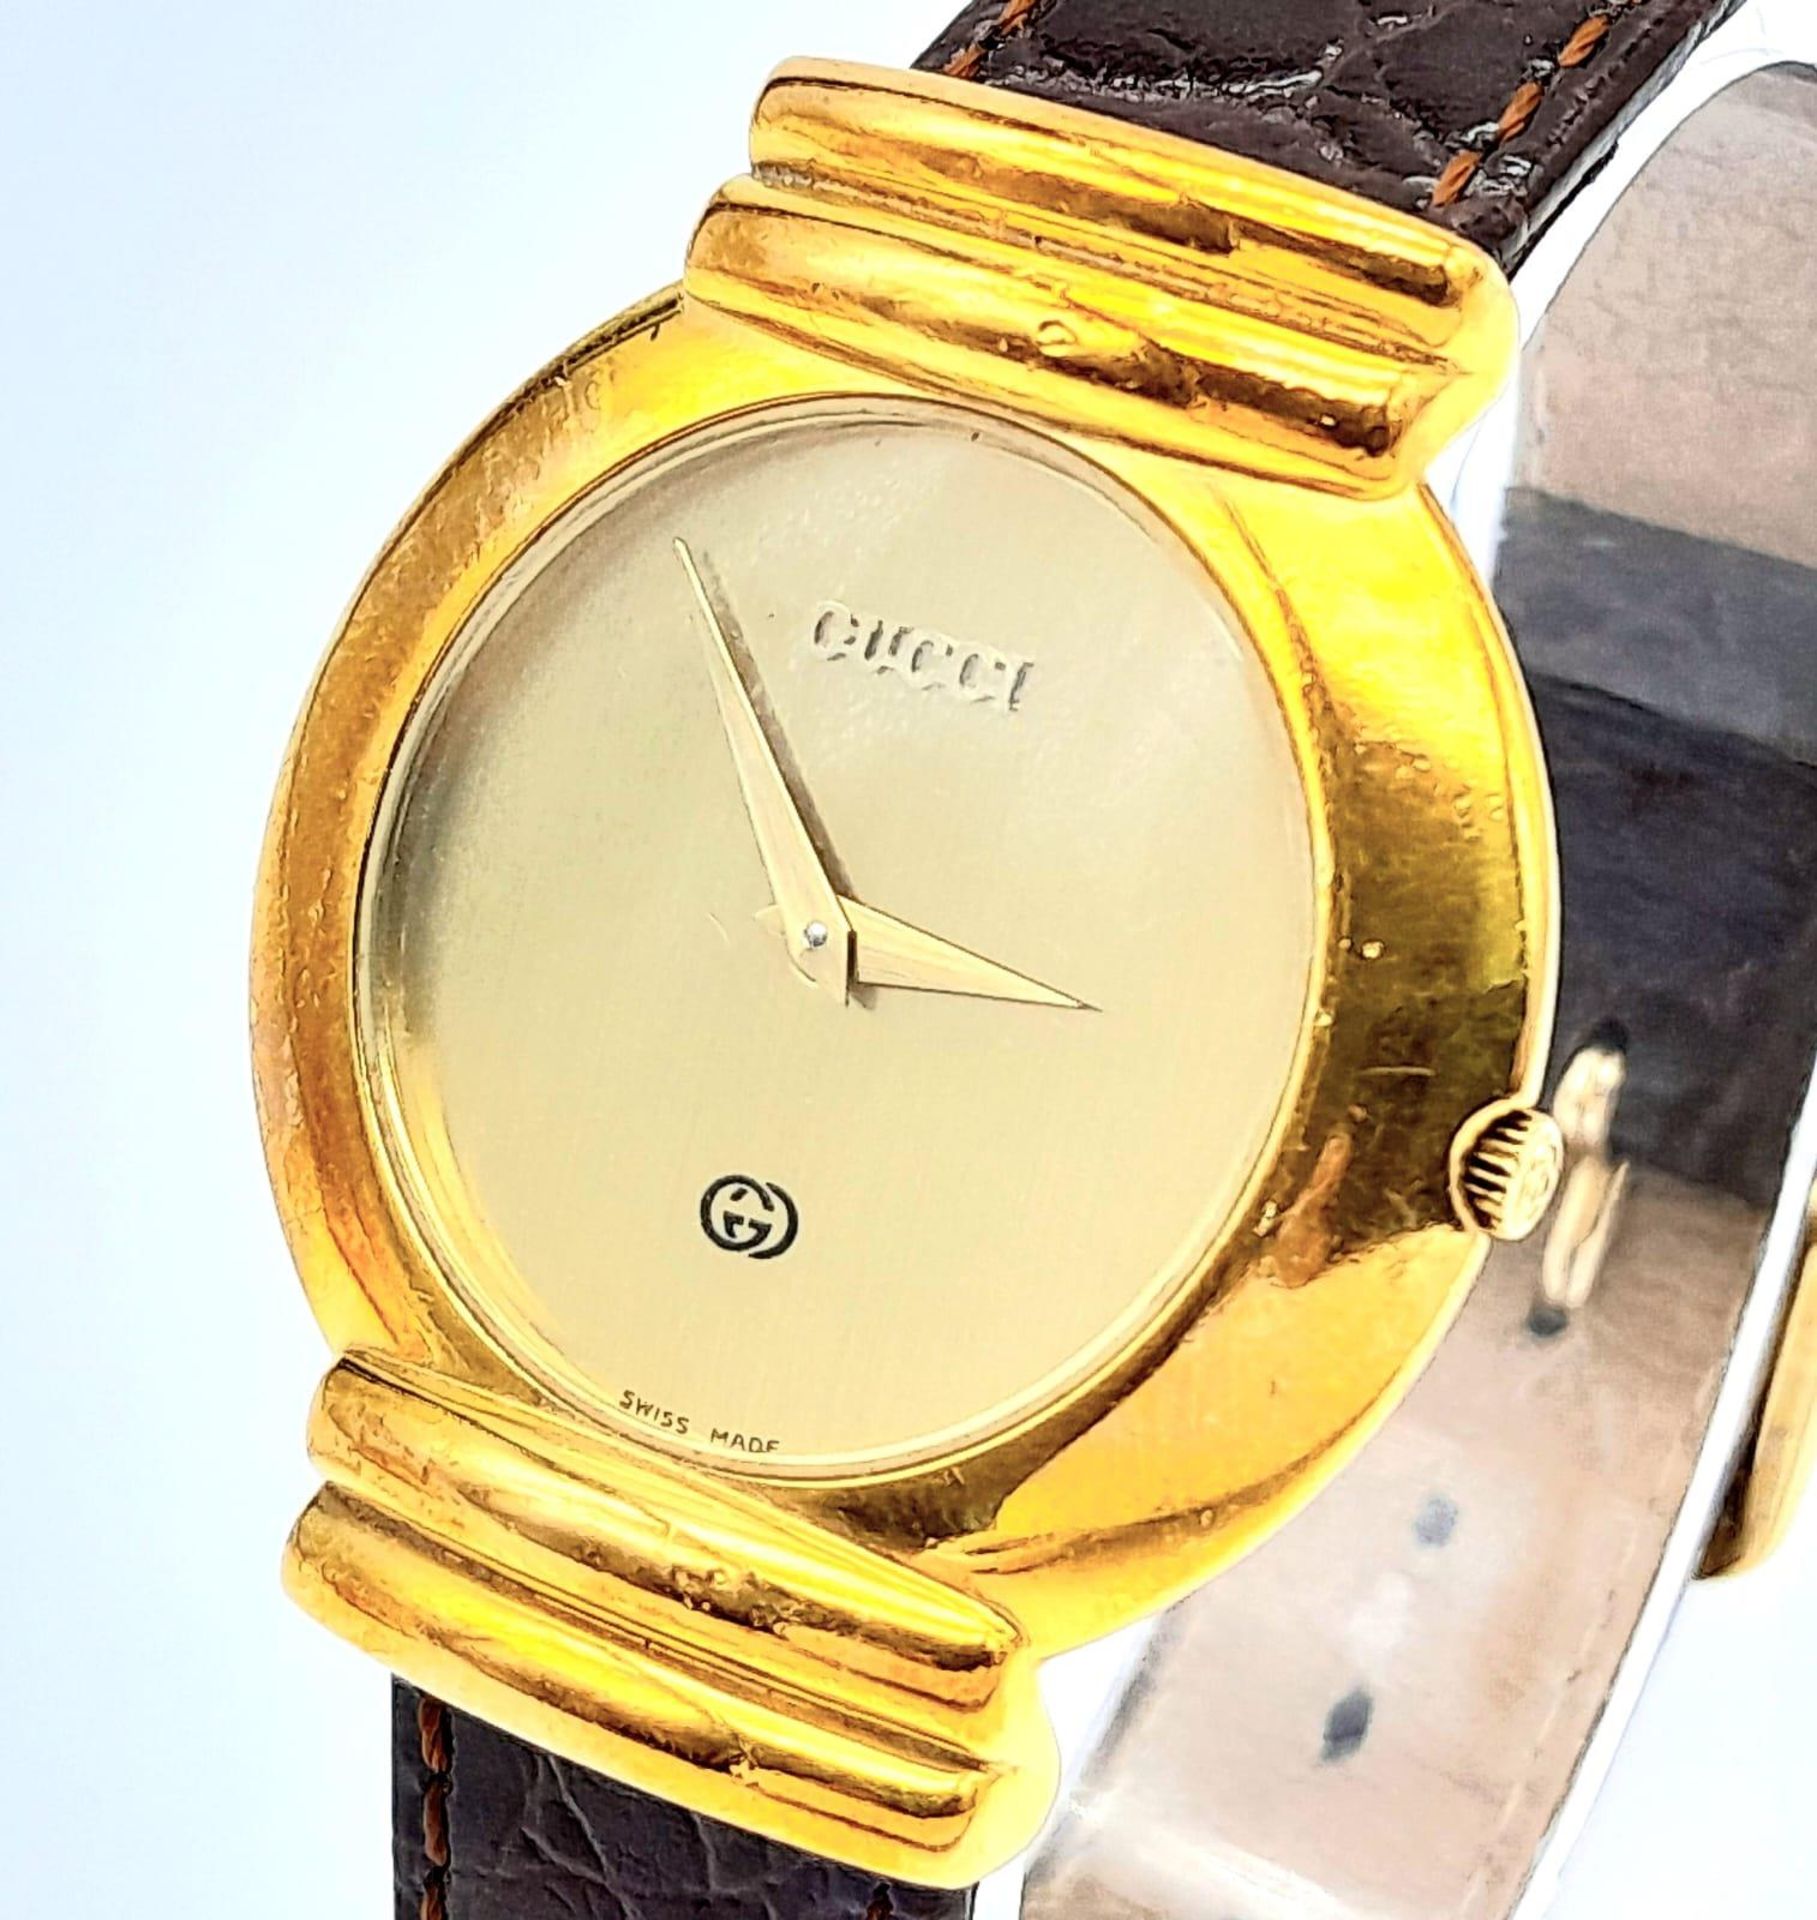 A gold plated GUCCI with crocodile skin strap, case: 33 mm, gold coloured dial and hands, Swiss made - Image 4 of 7